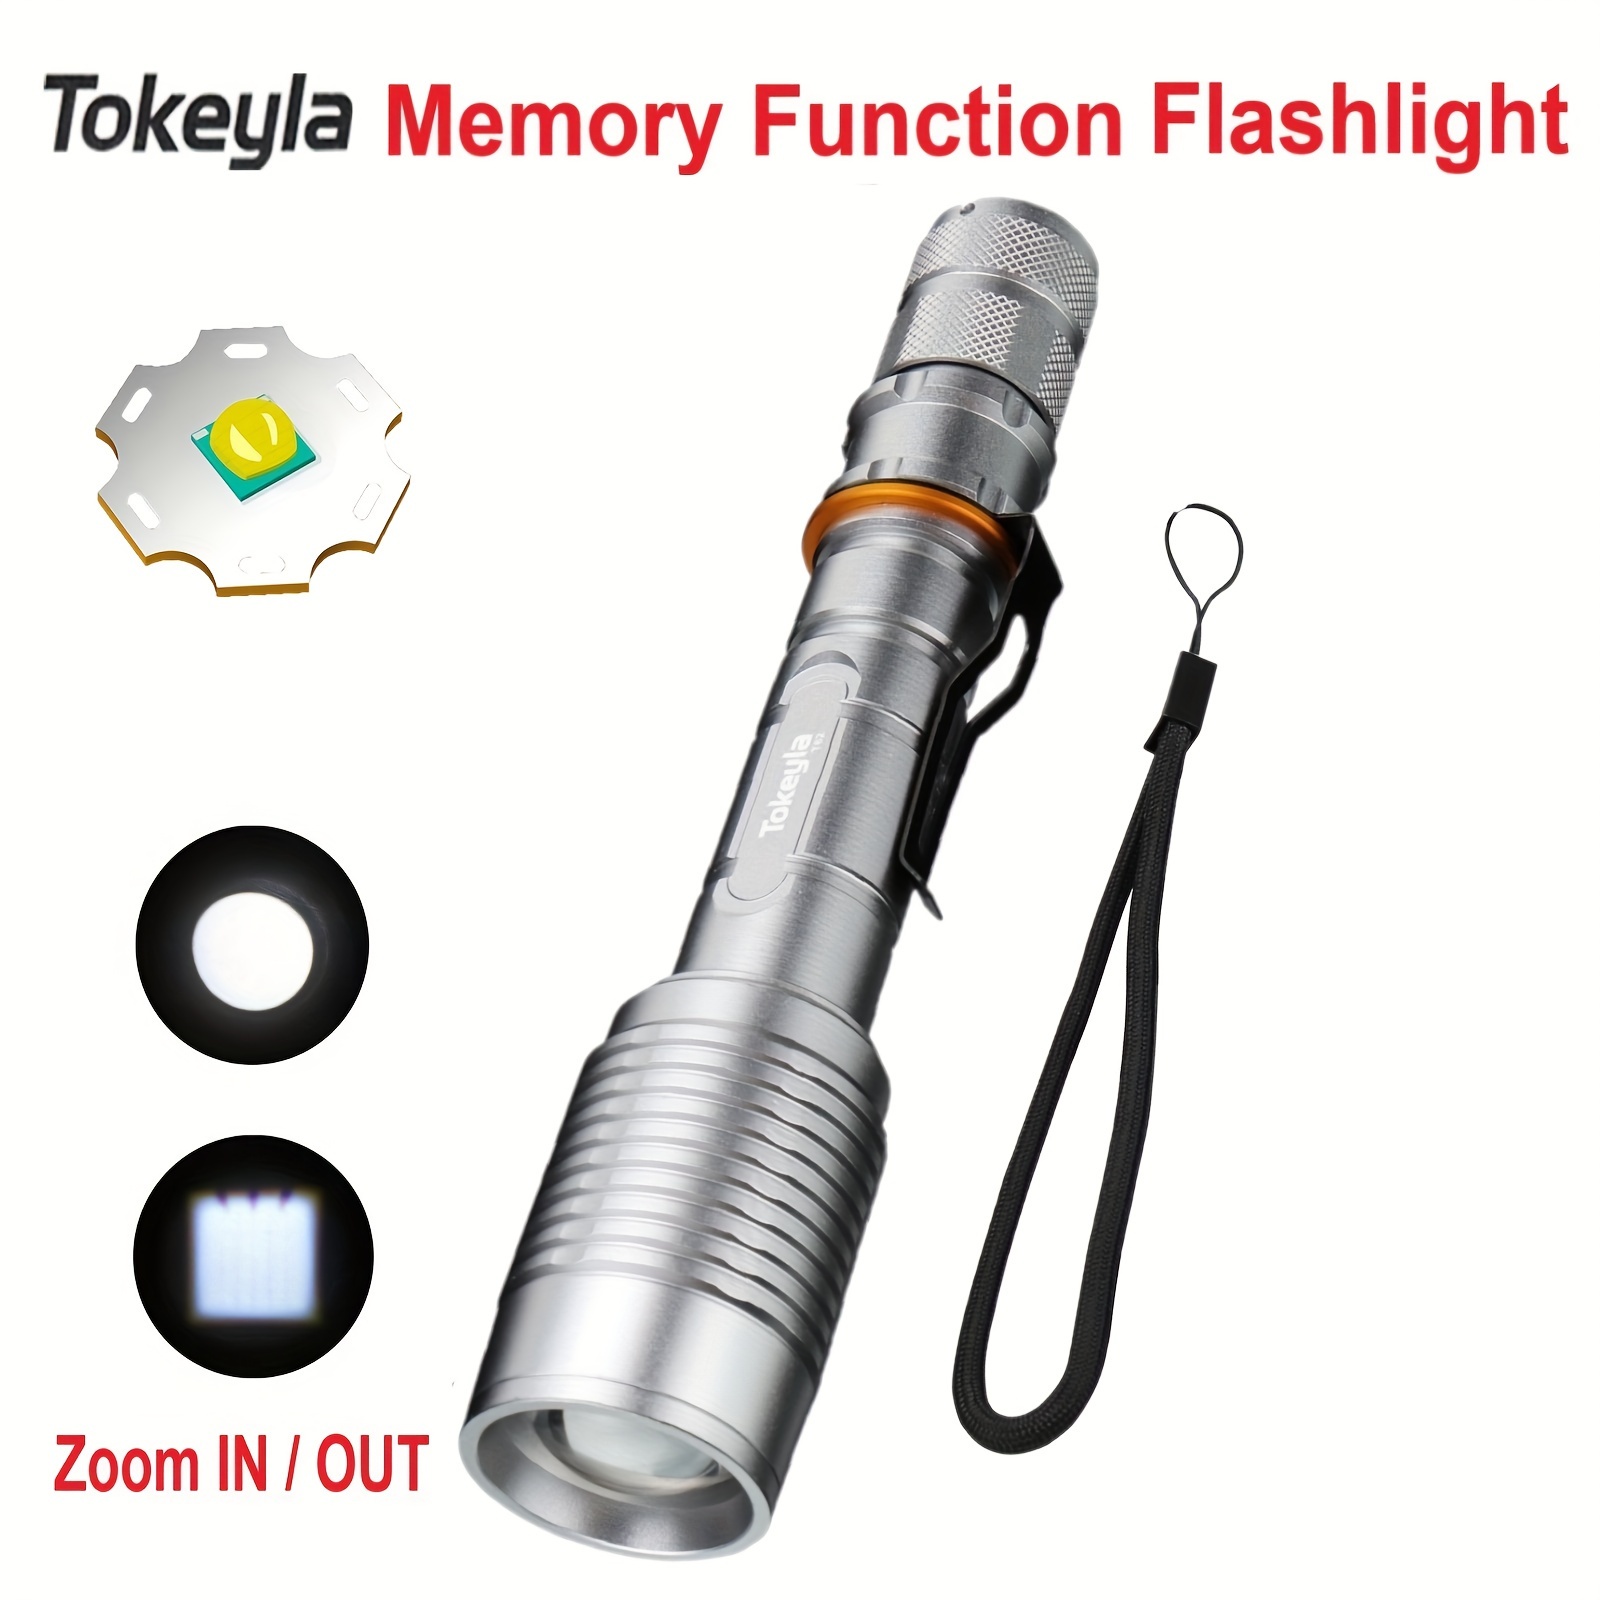 

1pc/a Set Led Flashlight Rechargeable 5 Modes Zoom Torch Lamp With Memory Function, Suitable For Household, Outdoor Activities, Dog Walking, Hiking, Hunting, Camping, Fishing.